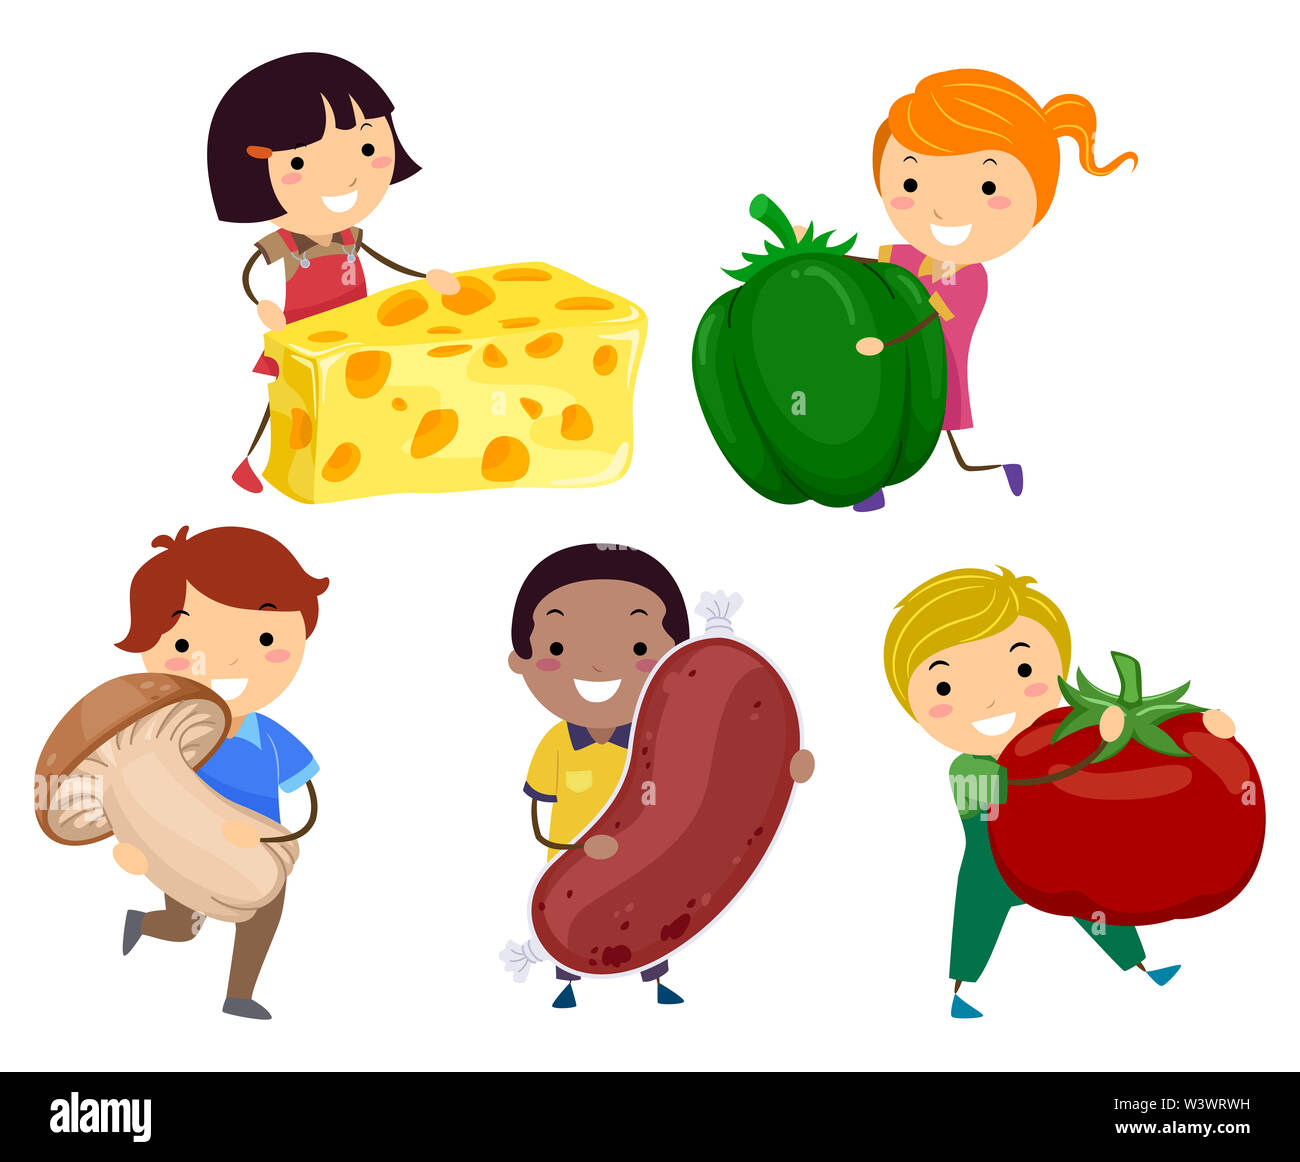 Illustration of Stickman Kids Holding Different Pizza Toppings Ingredients from Cheese, Bell Pepper, Mushroom, Salami and Tomato Stock Photo